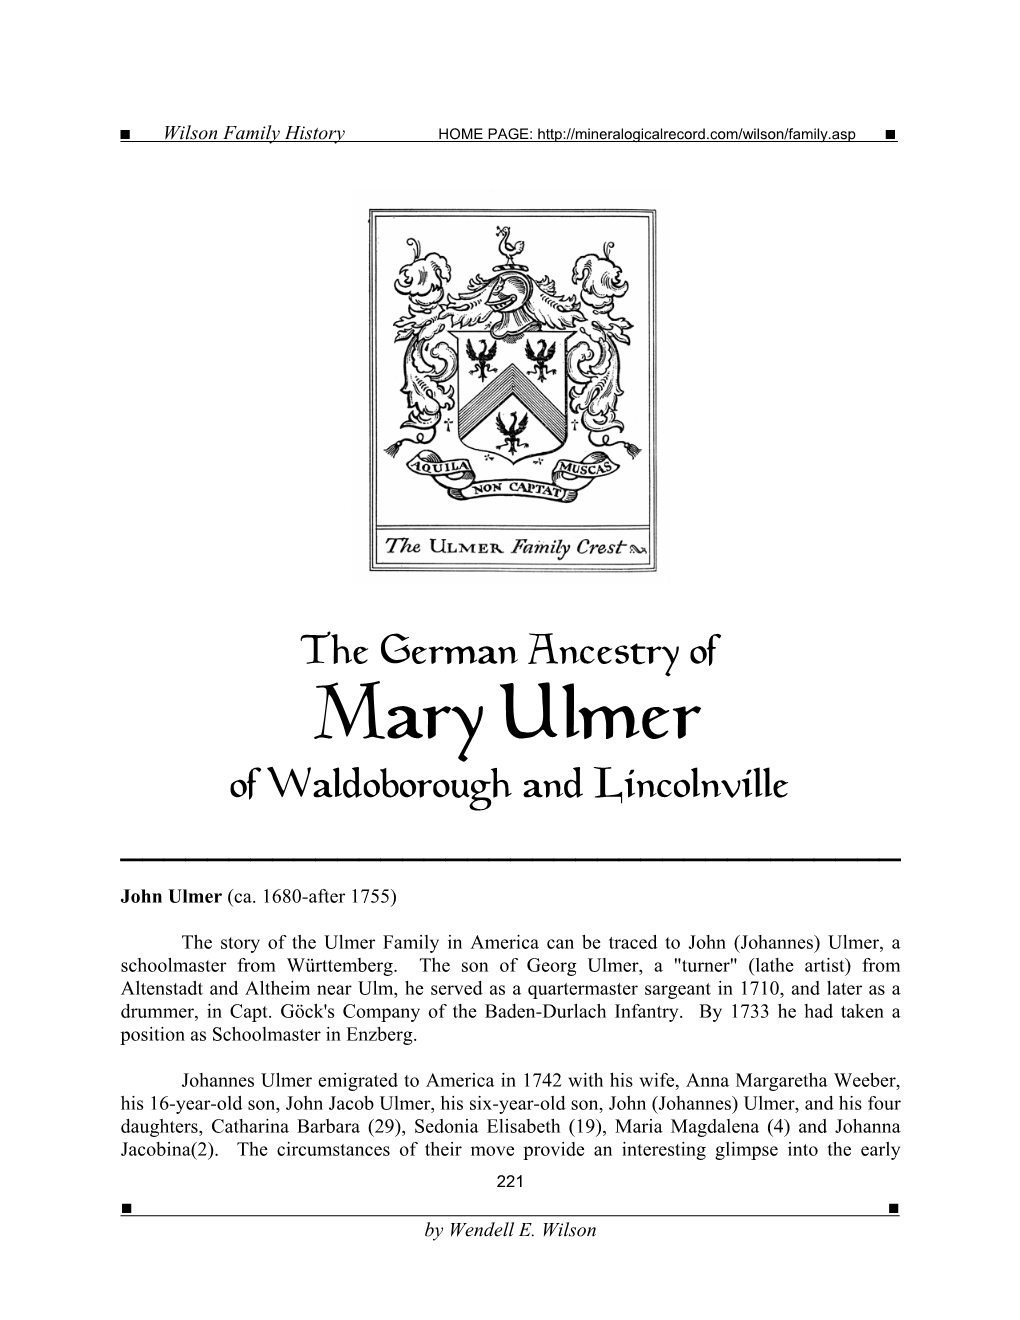 Mary Ulmer of Waldoborough and Lincolnville ______